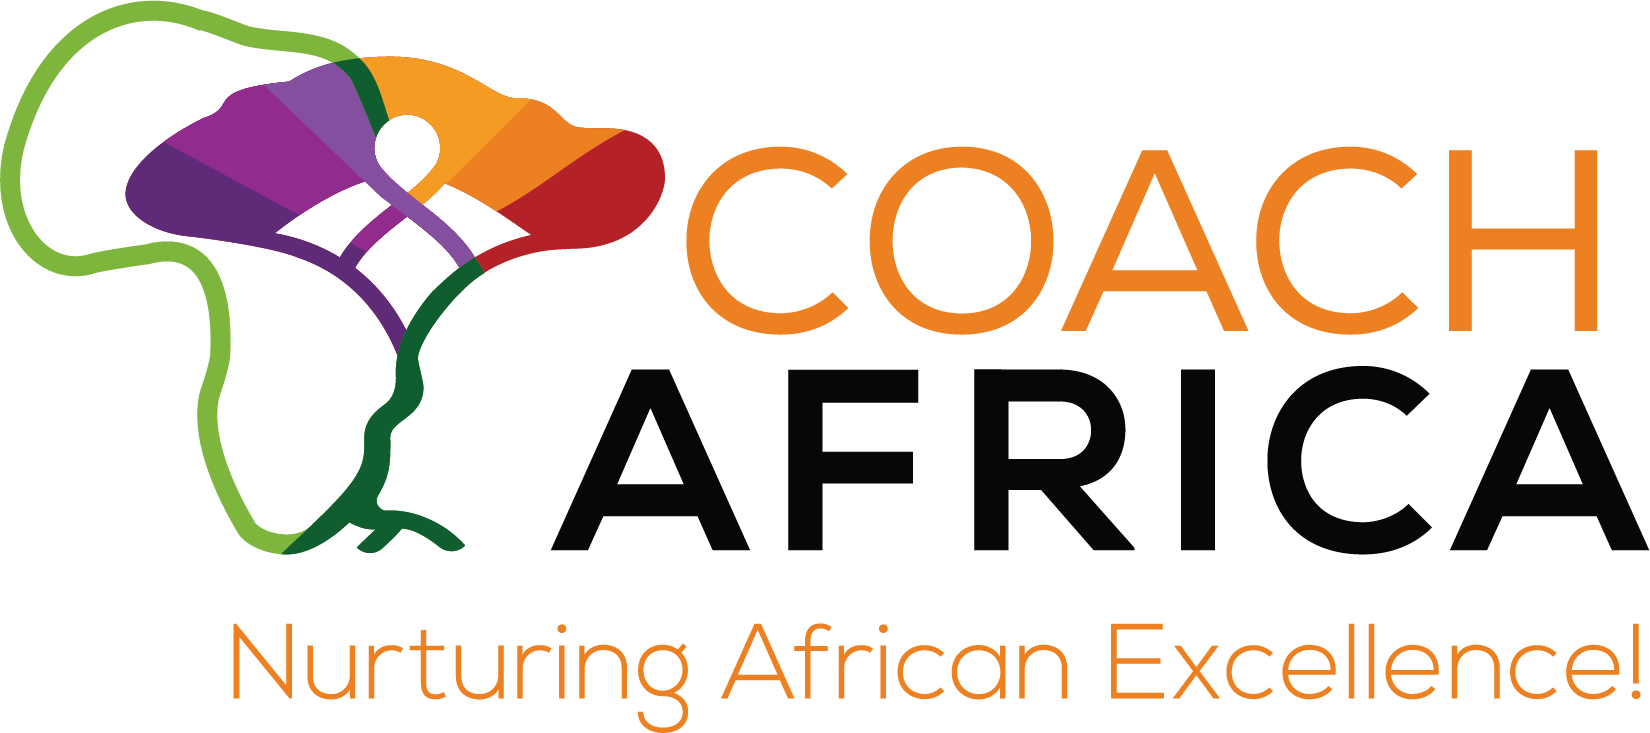 CoachAfrica Logo Color.png